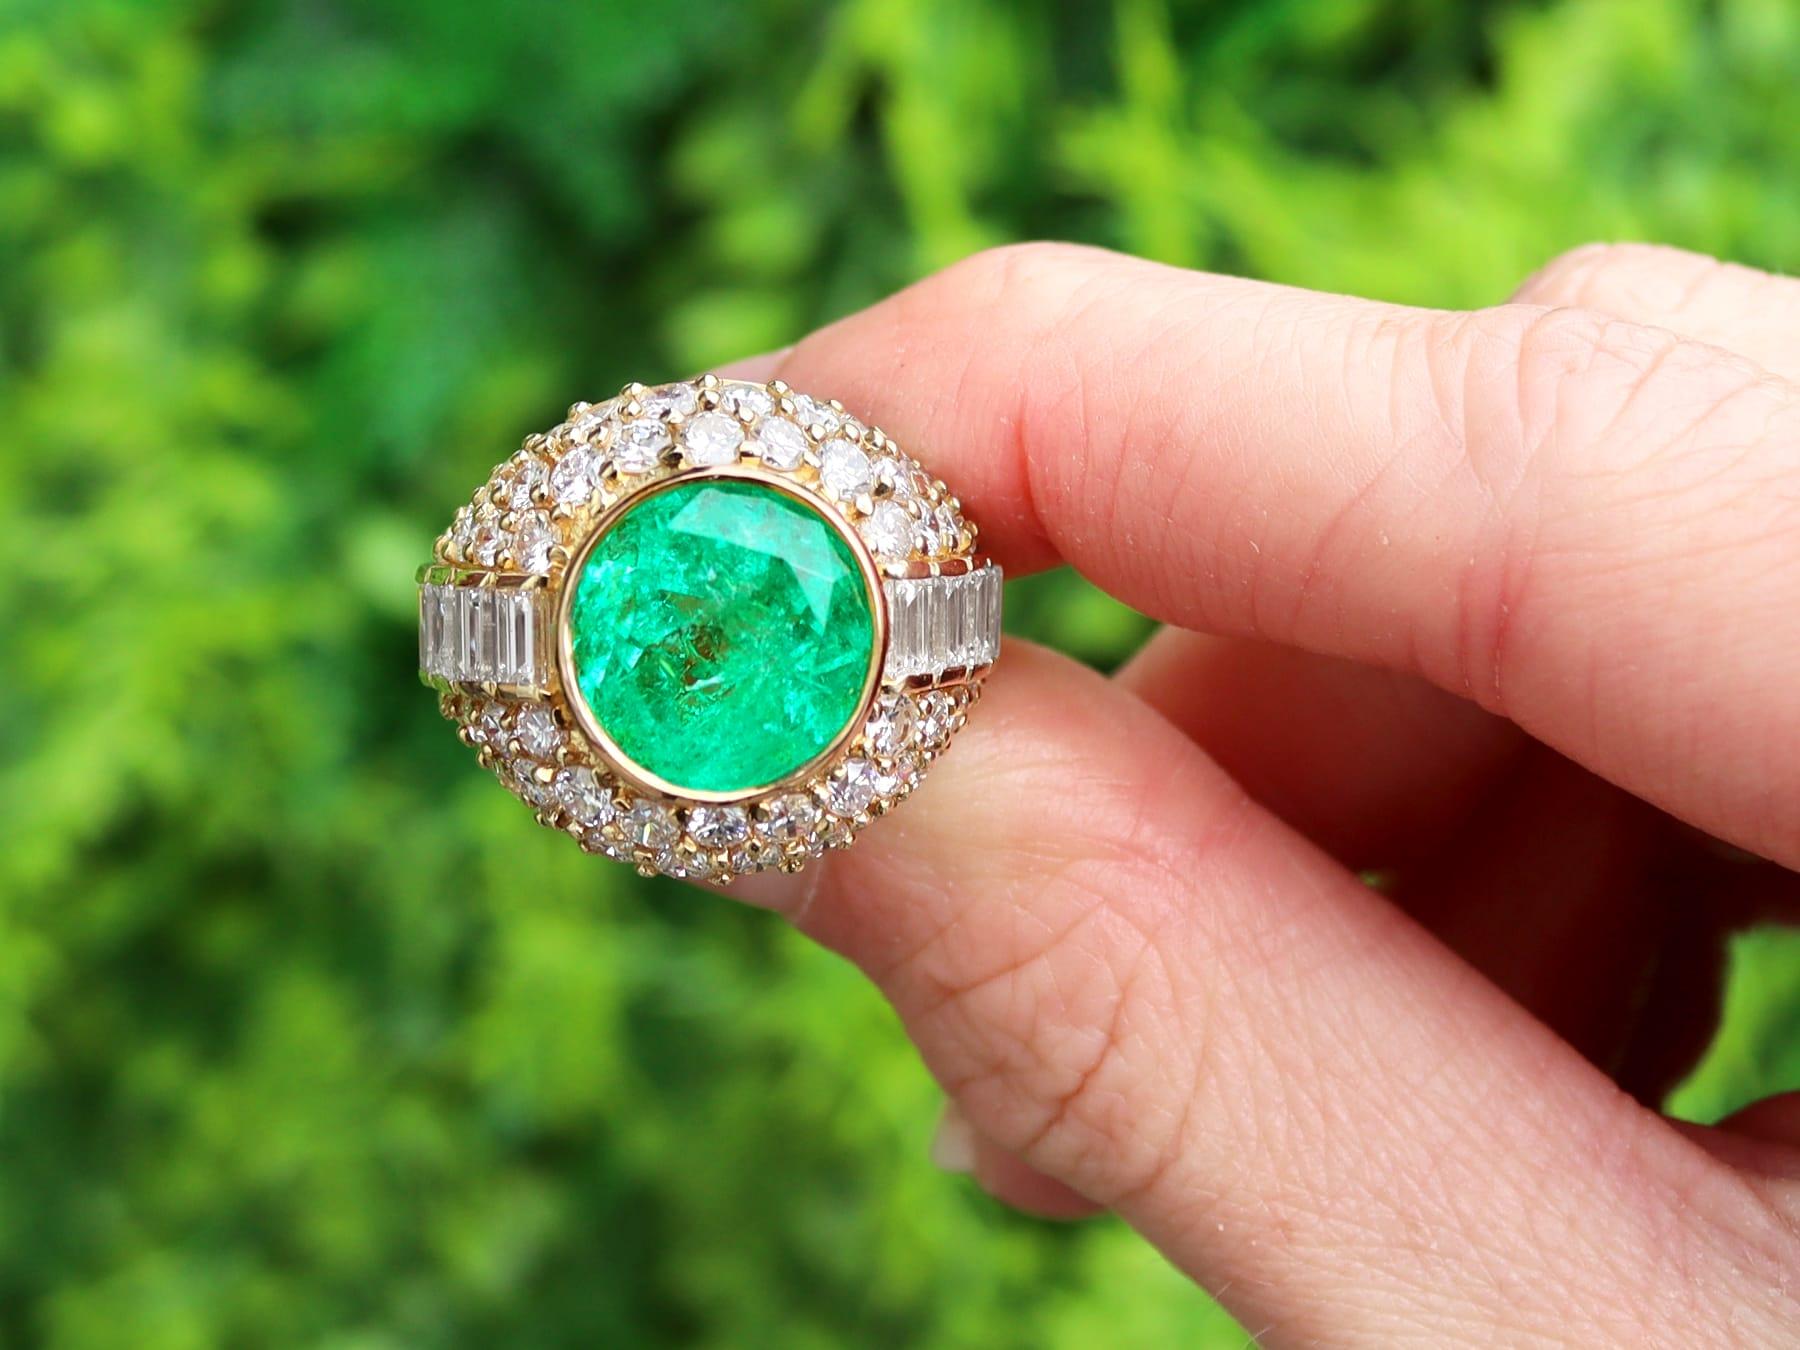 A magnificent, fine and impressive, large vintage 1990's 5.12 carat Colombian emerald and 3.45 carat diamond, 18 carat yellow gold dress ring; part of our diverse gemstone jewellery and estate jewelry collections

This magnificent, fine and